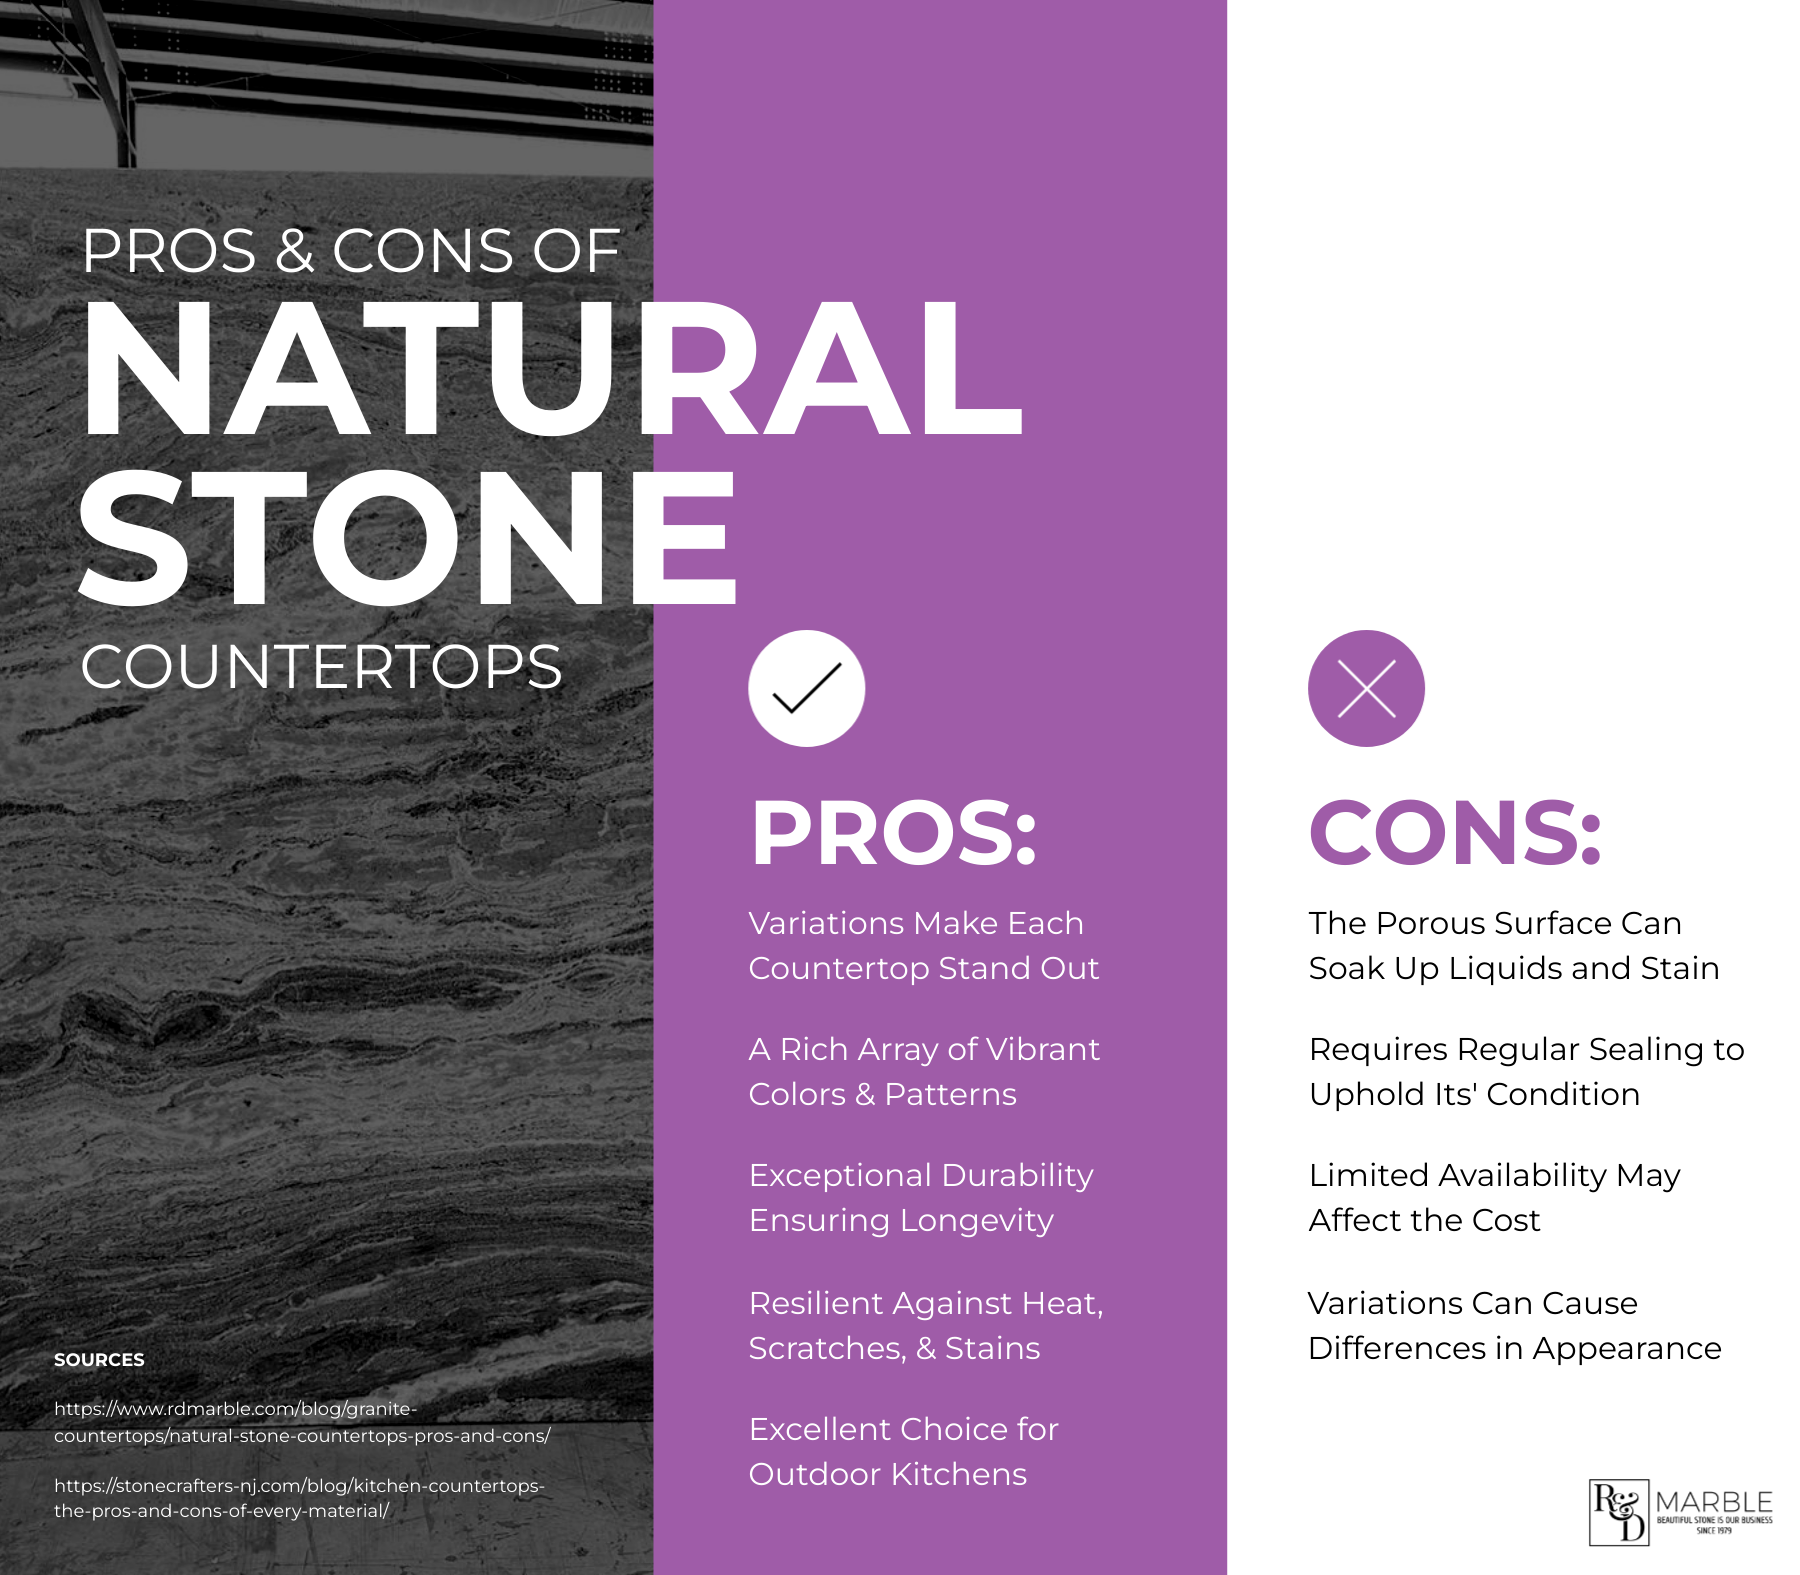 Natural Stone Countertops Pros and Cons Infographic by R&D Marble